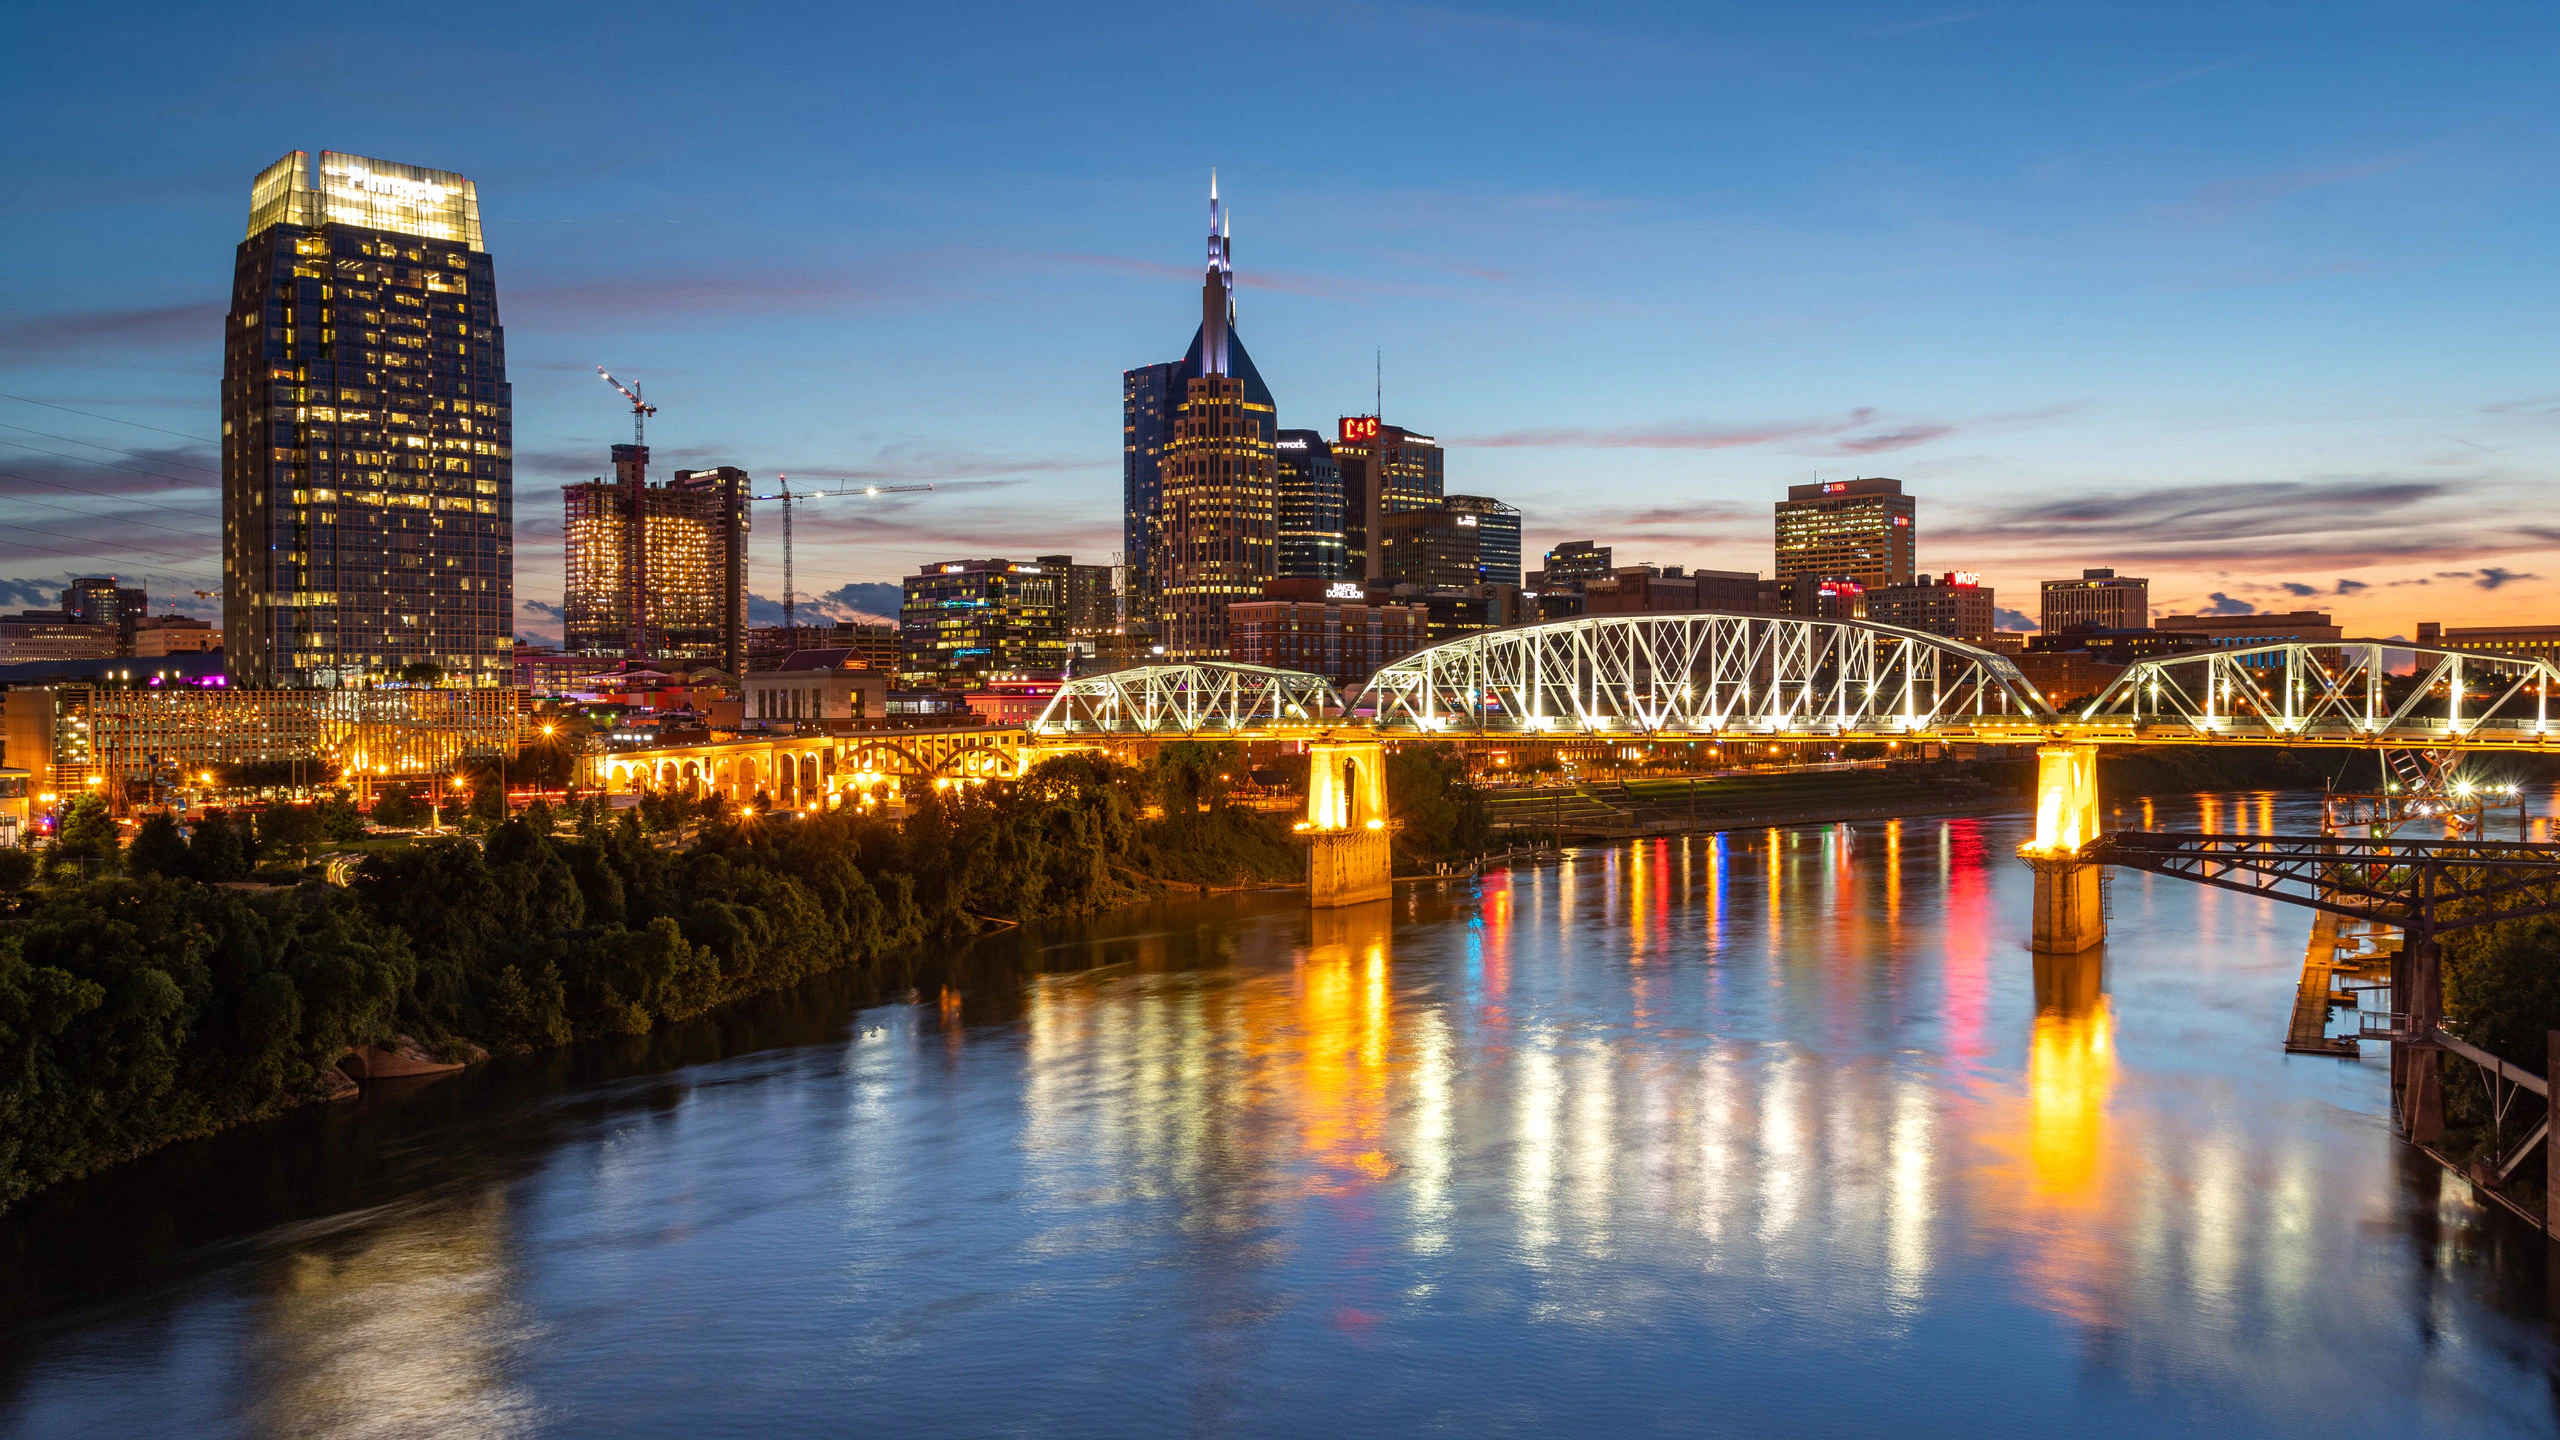 Nashville: Where Music and Entertainment Take Center Stage